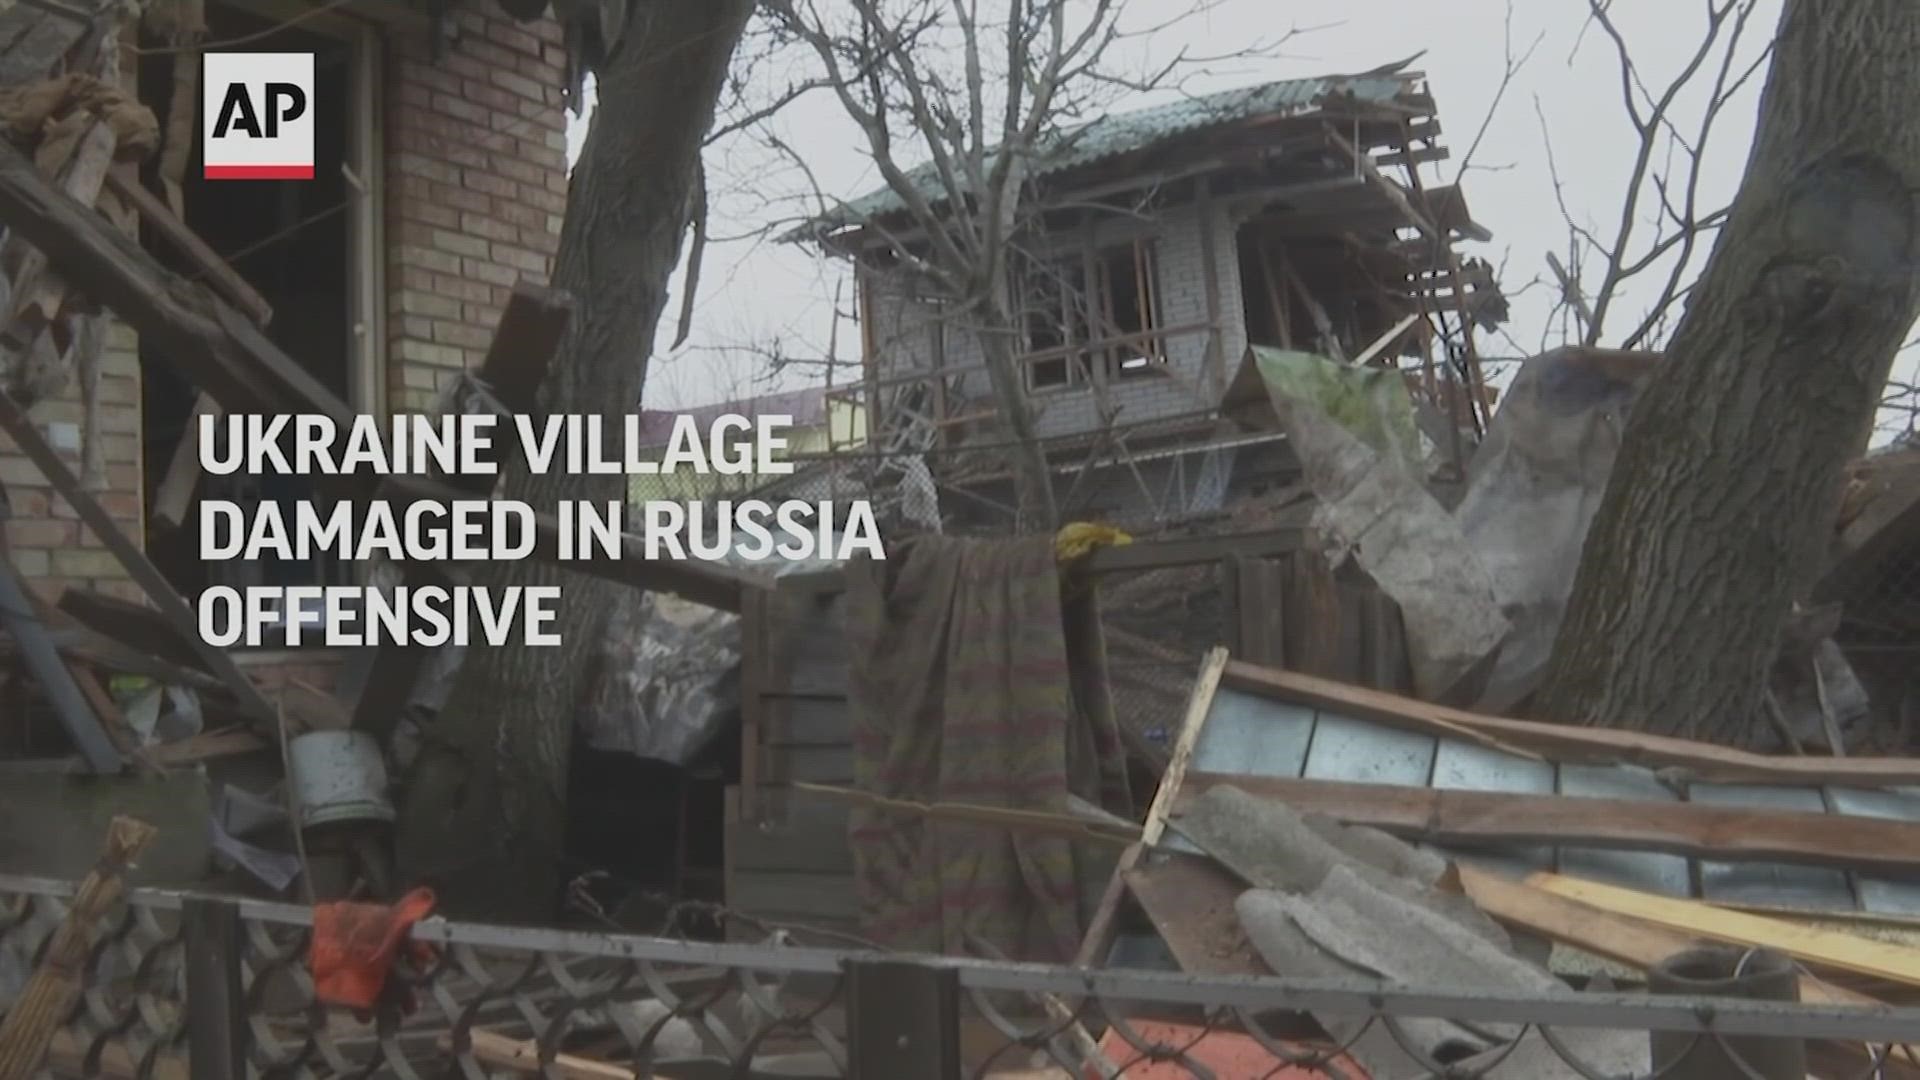 Gorenka, a small village on the outskirts of Ukraine's capital, has been left shellshocked after being caught up in Russia's assault on Kyiv.